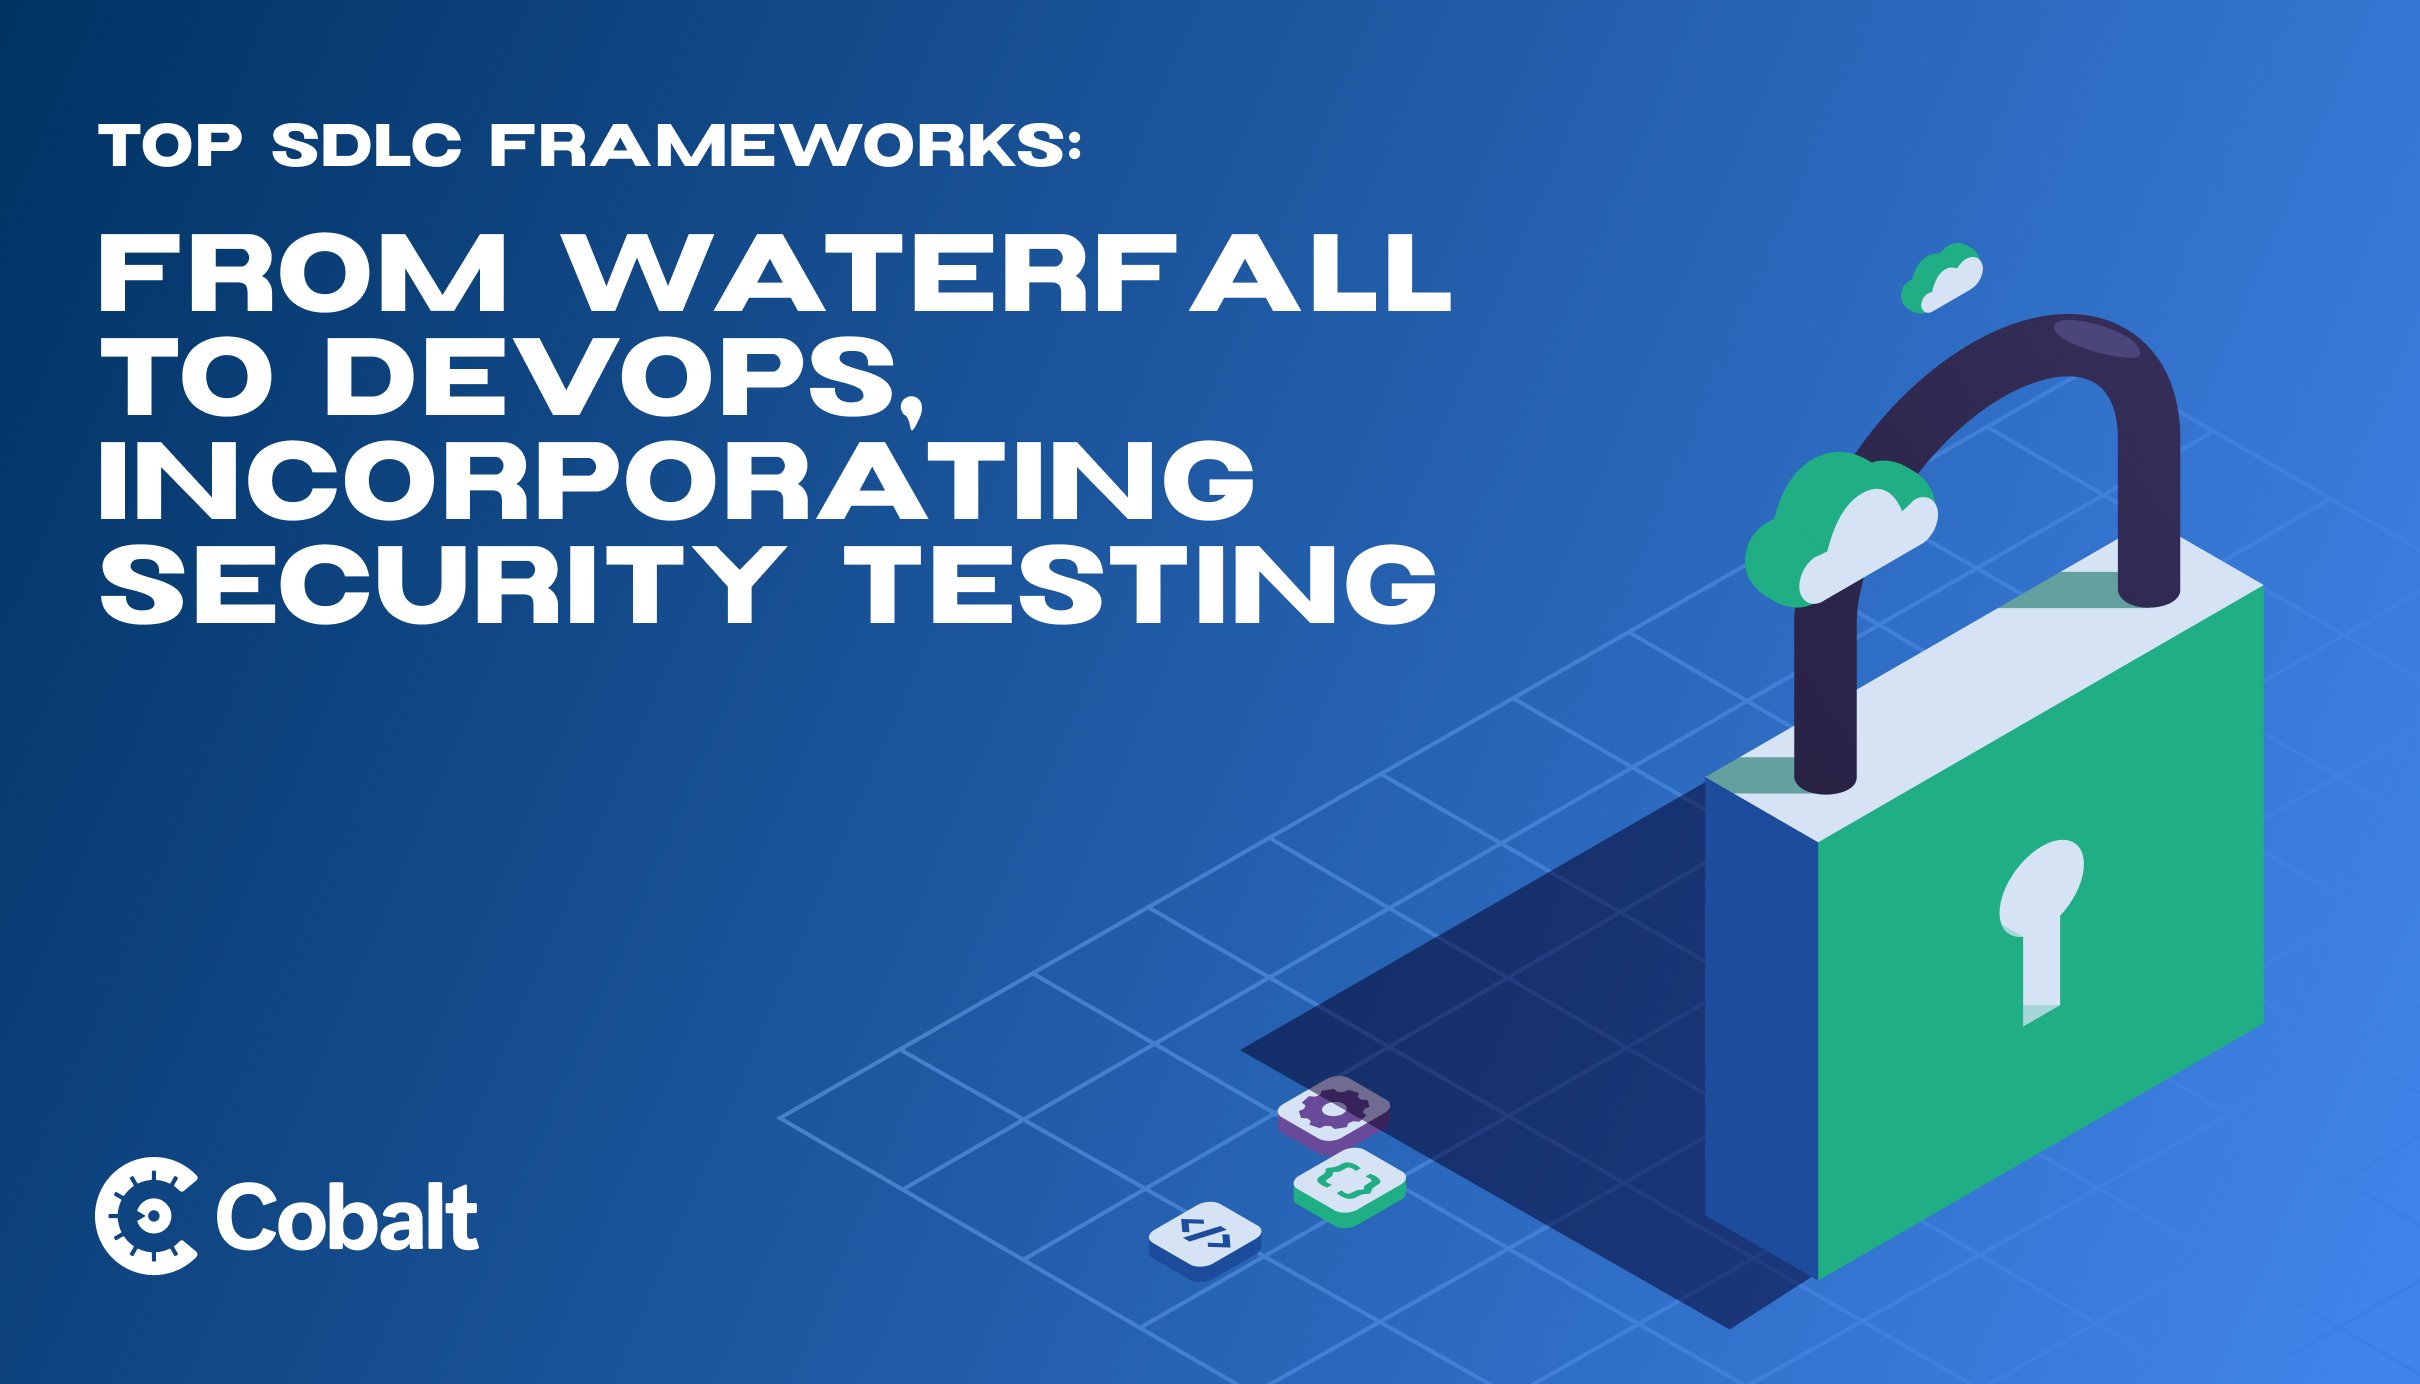 Top SDLC Frameworks: From Waterfall to DevOps, Incorporating Security Testing